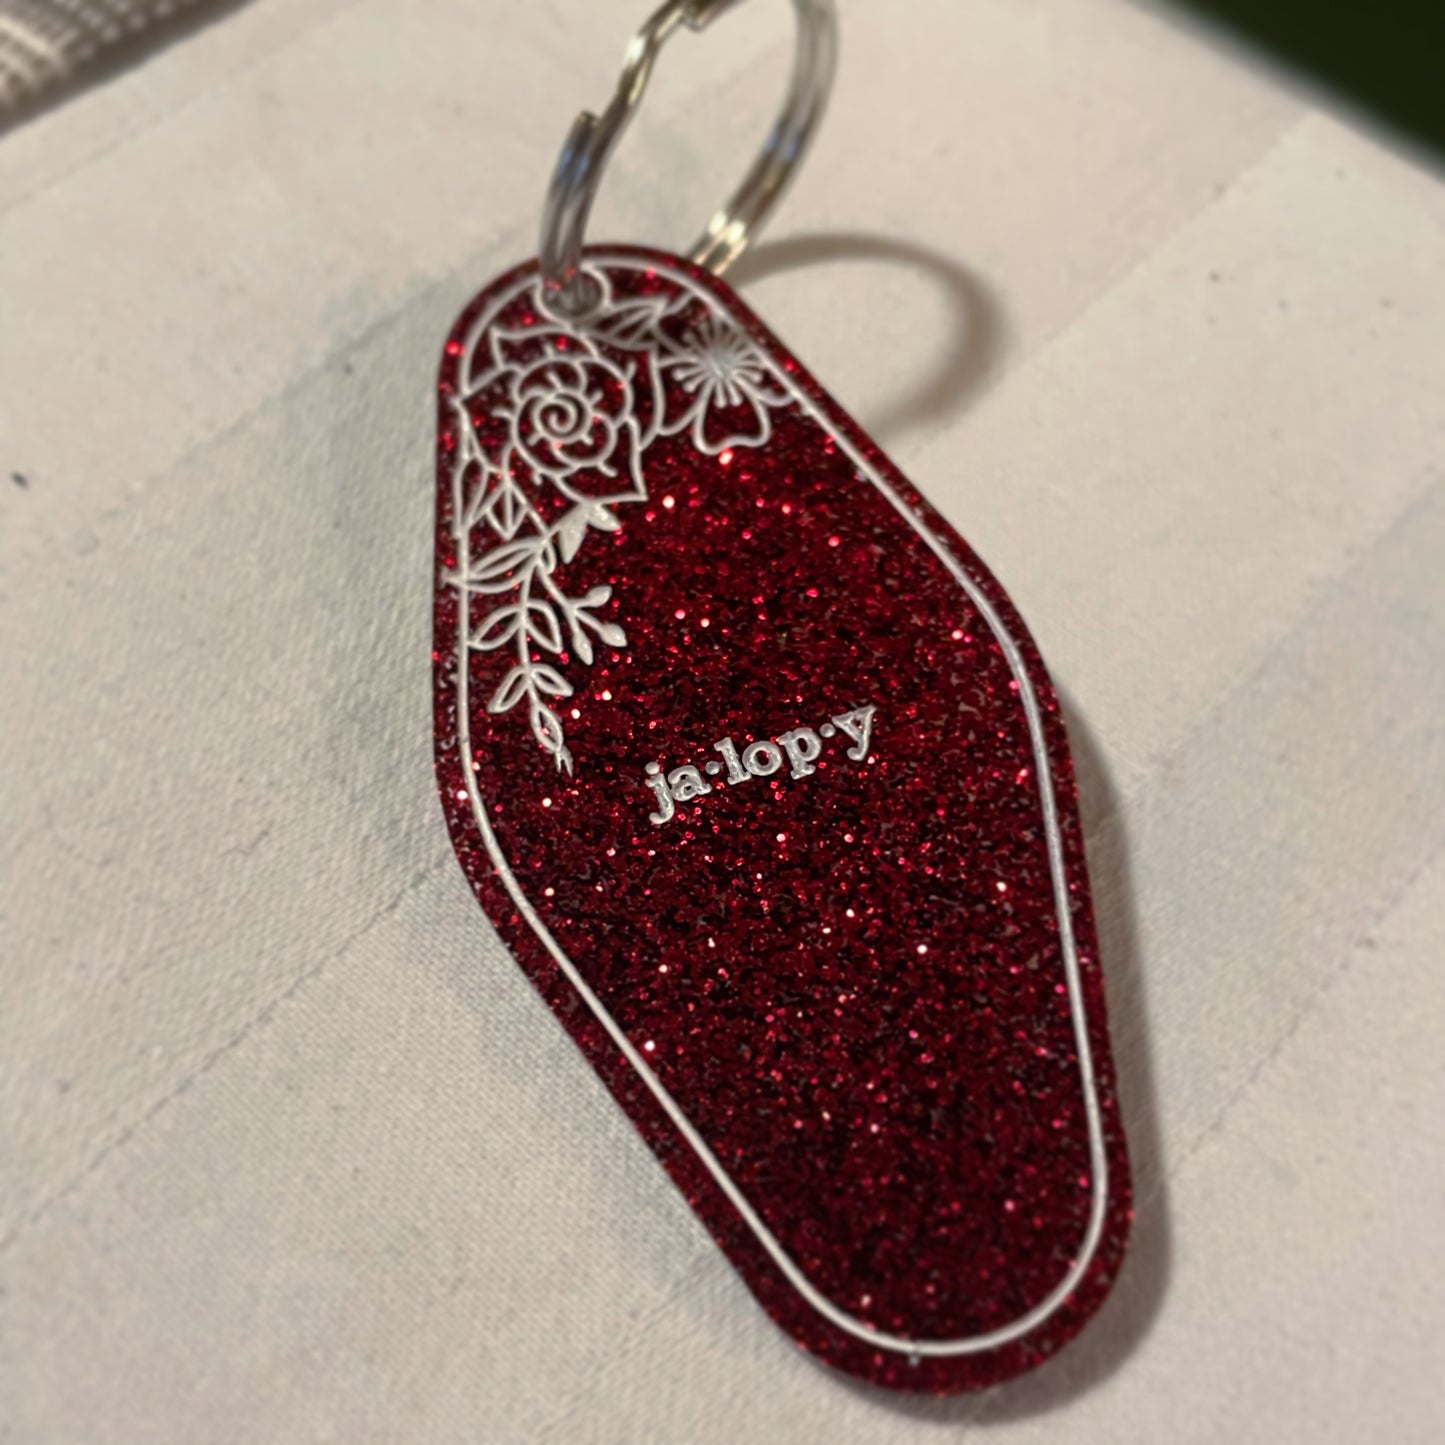 Jalopy Keychain - Red Glitter & Roses